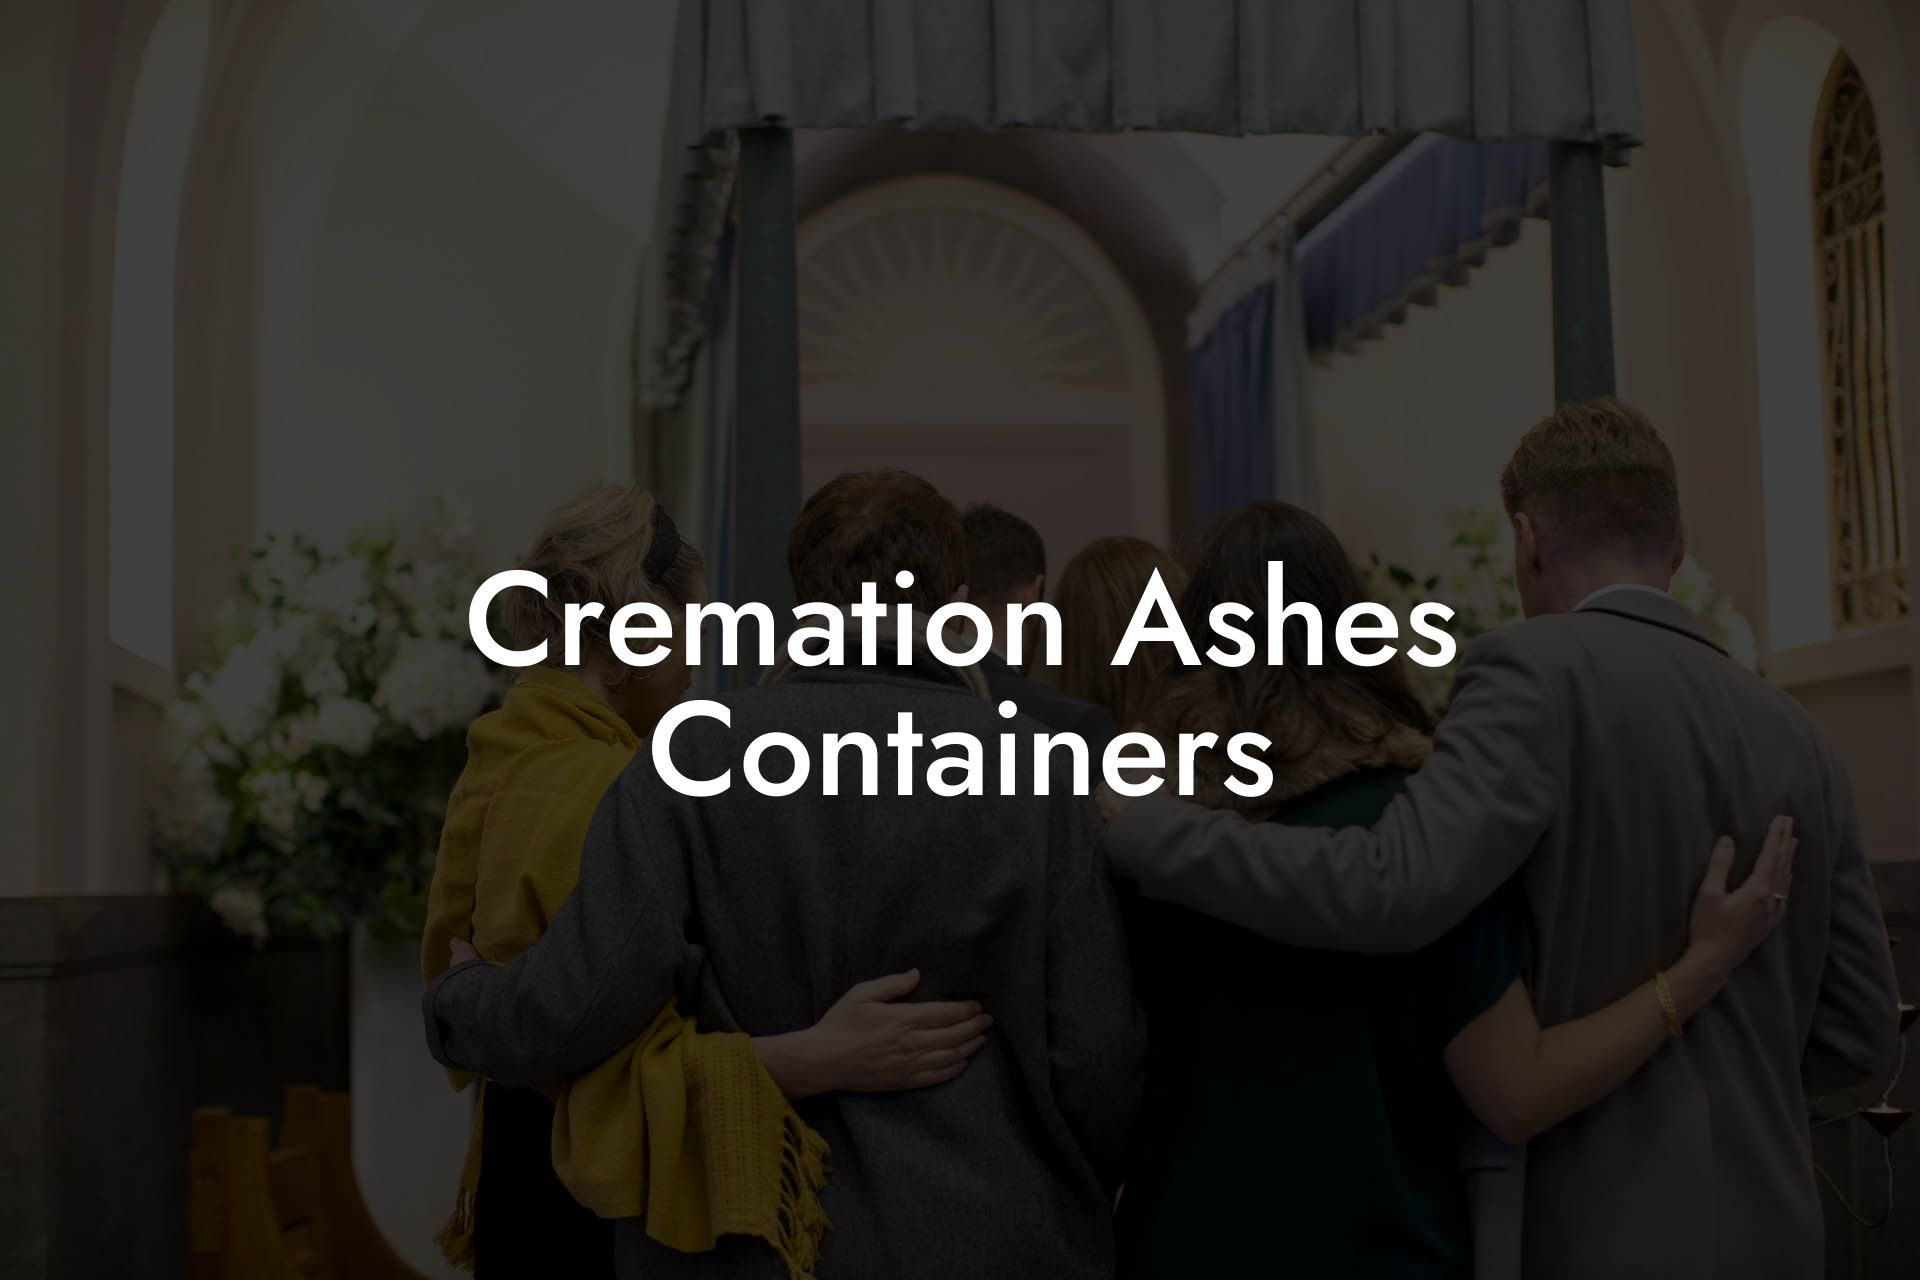 Cremation Ashes Containers